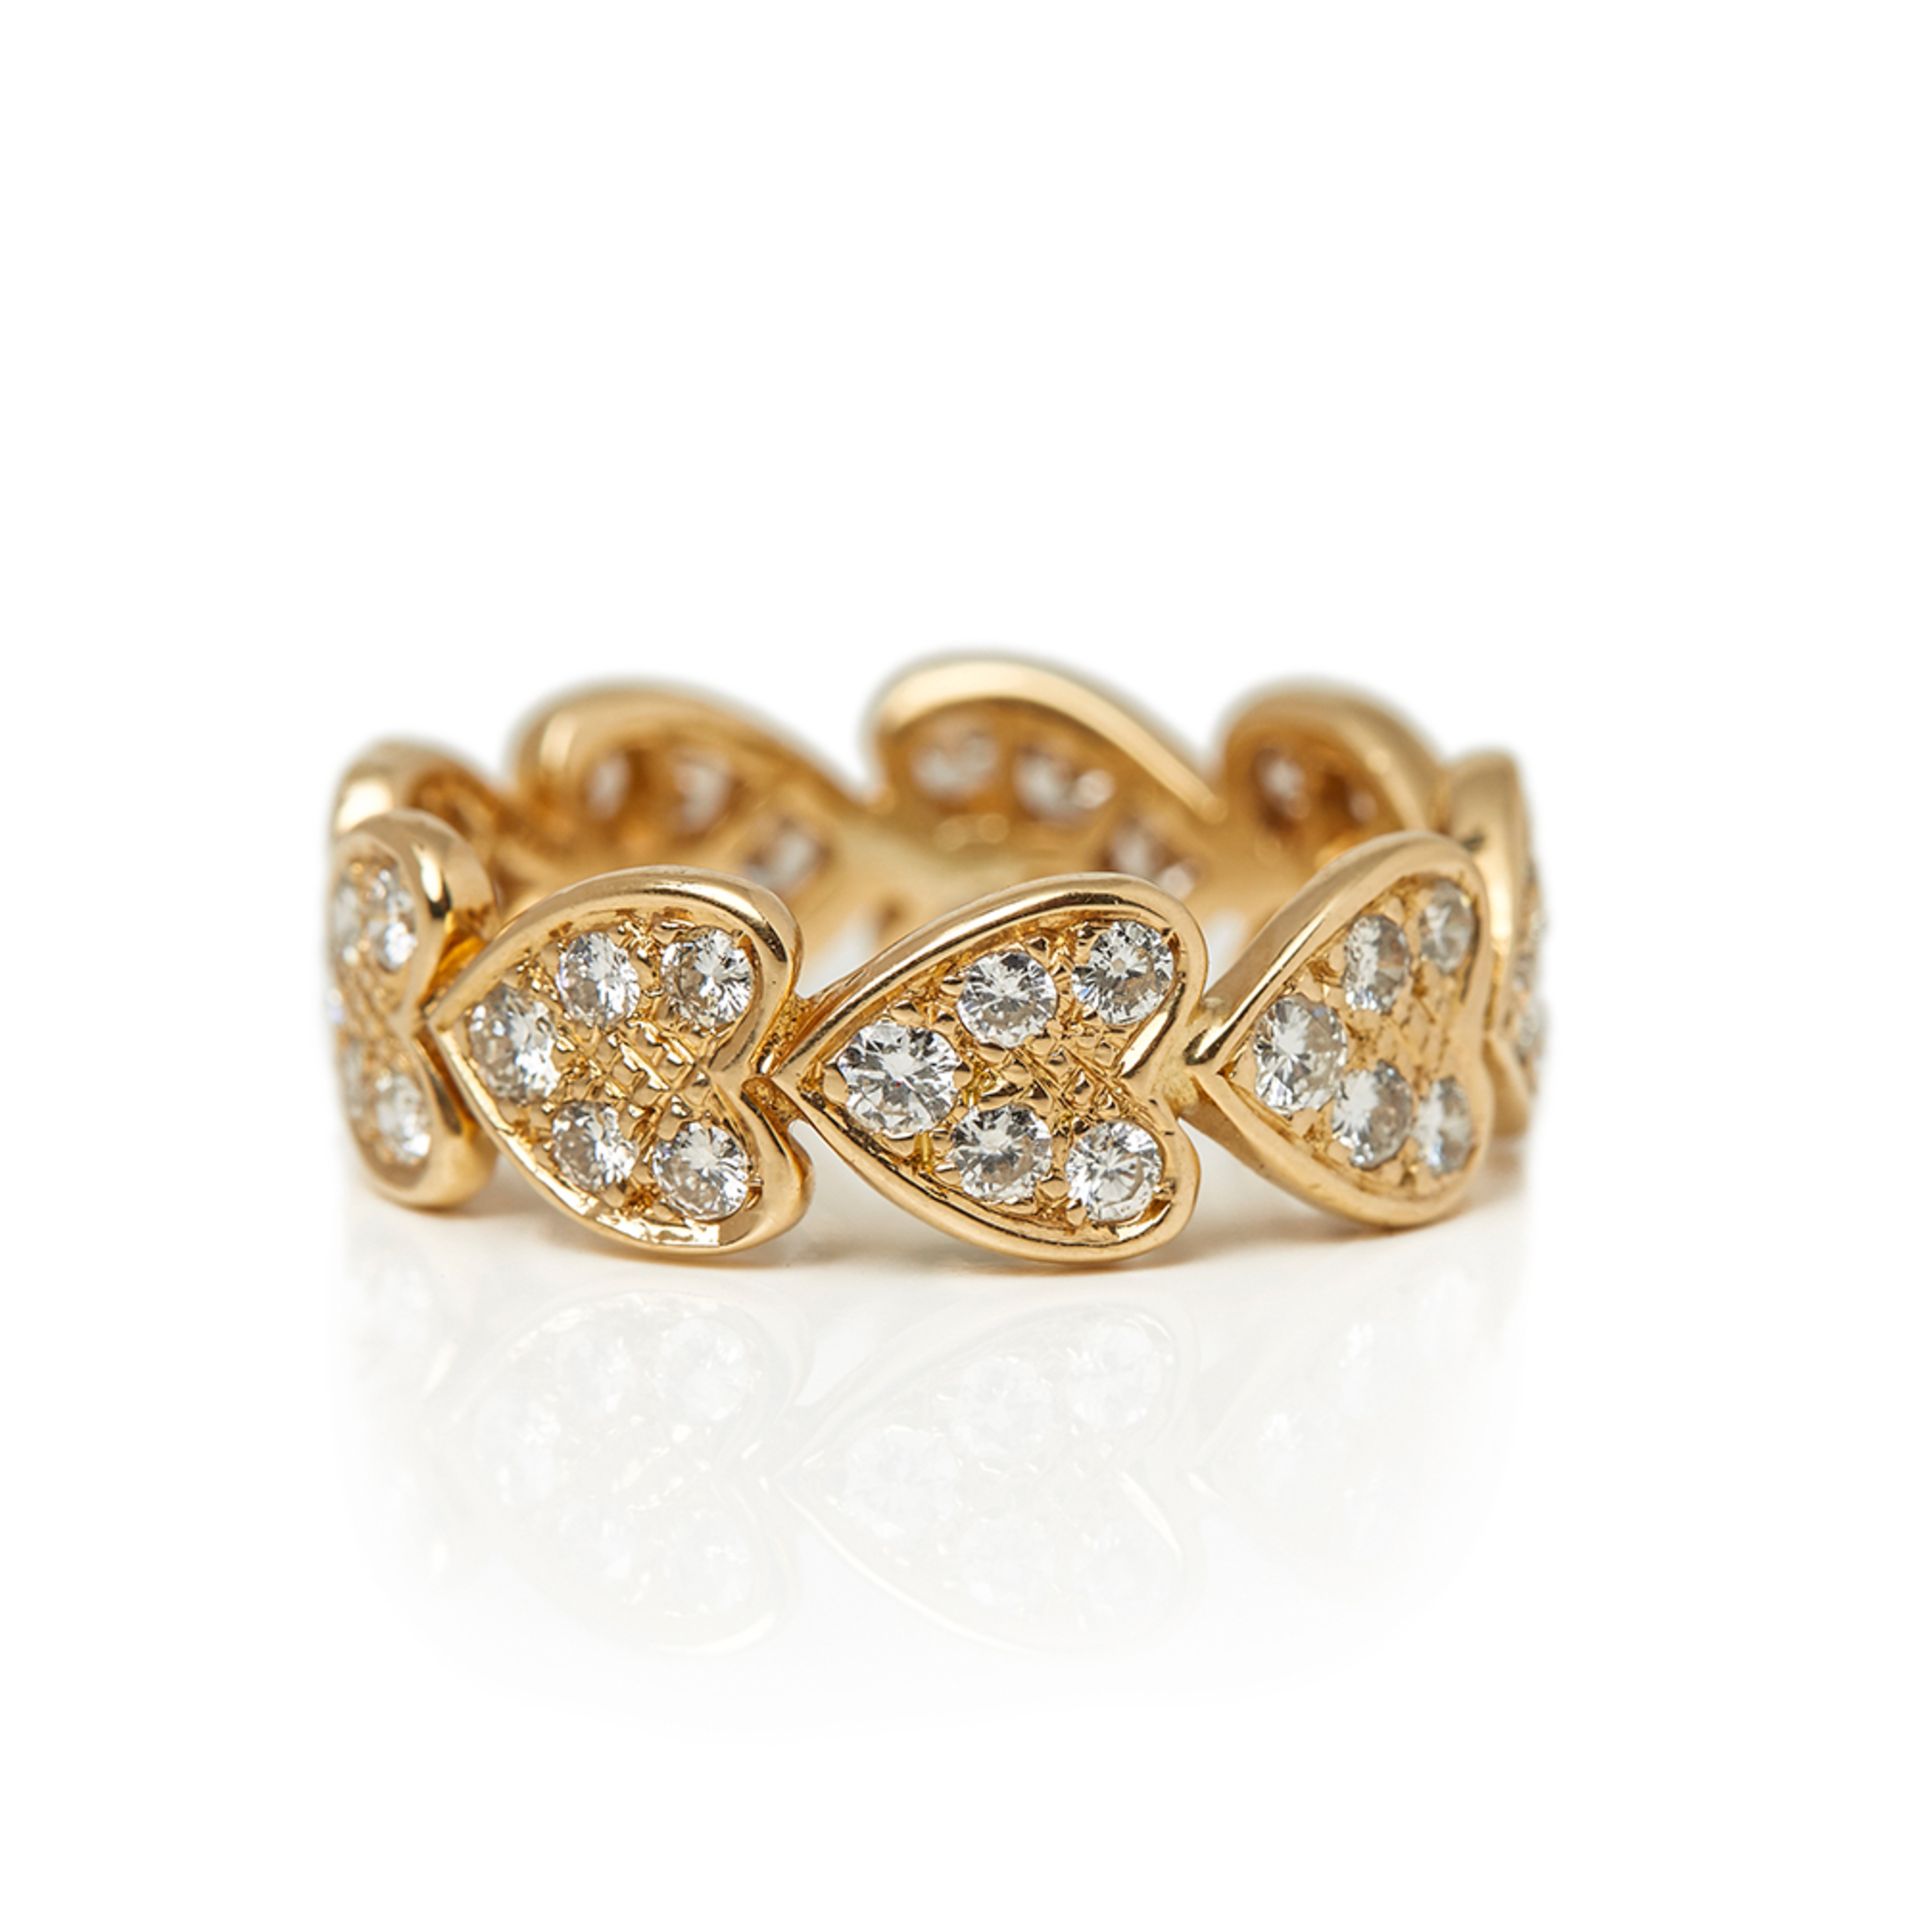 Cartier 18k Yellow Gold Diamond Heart Design Band Ring - Image 7 of 9